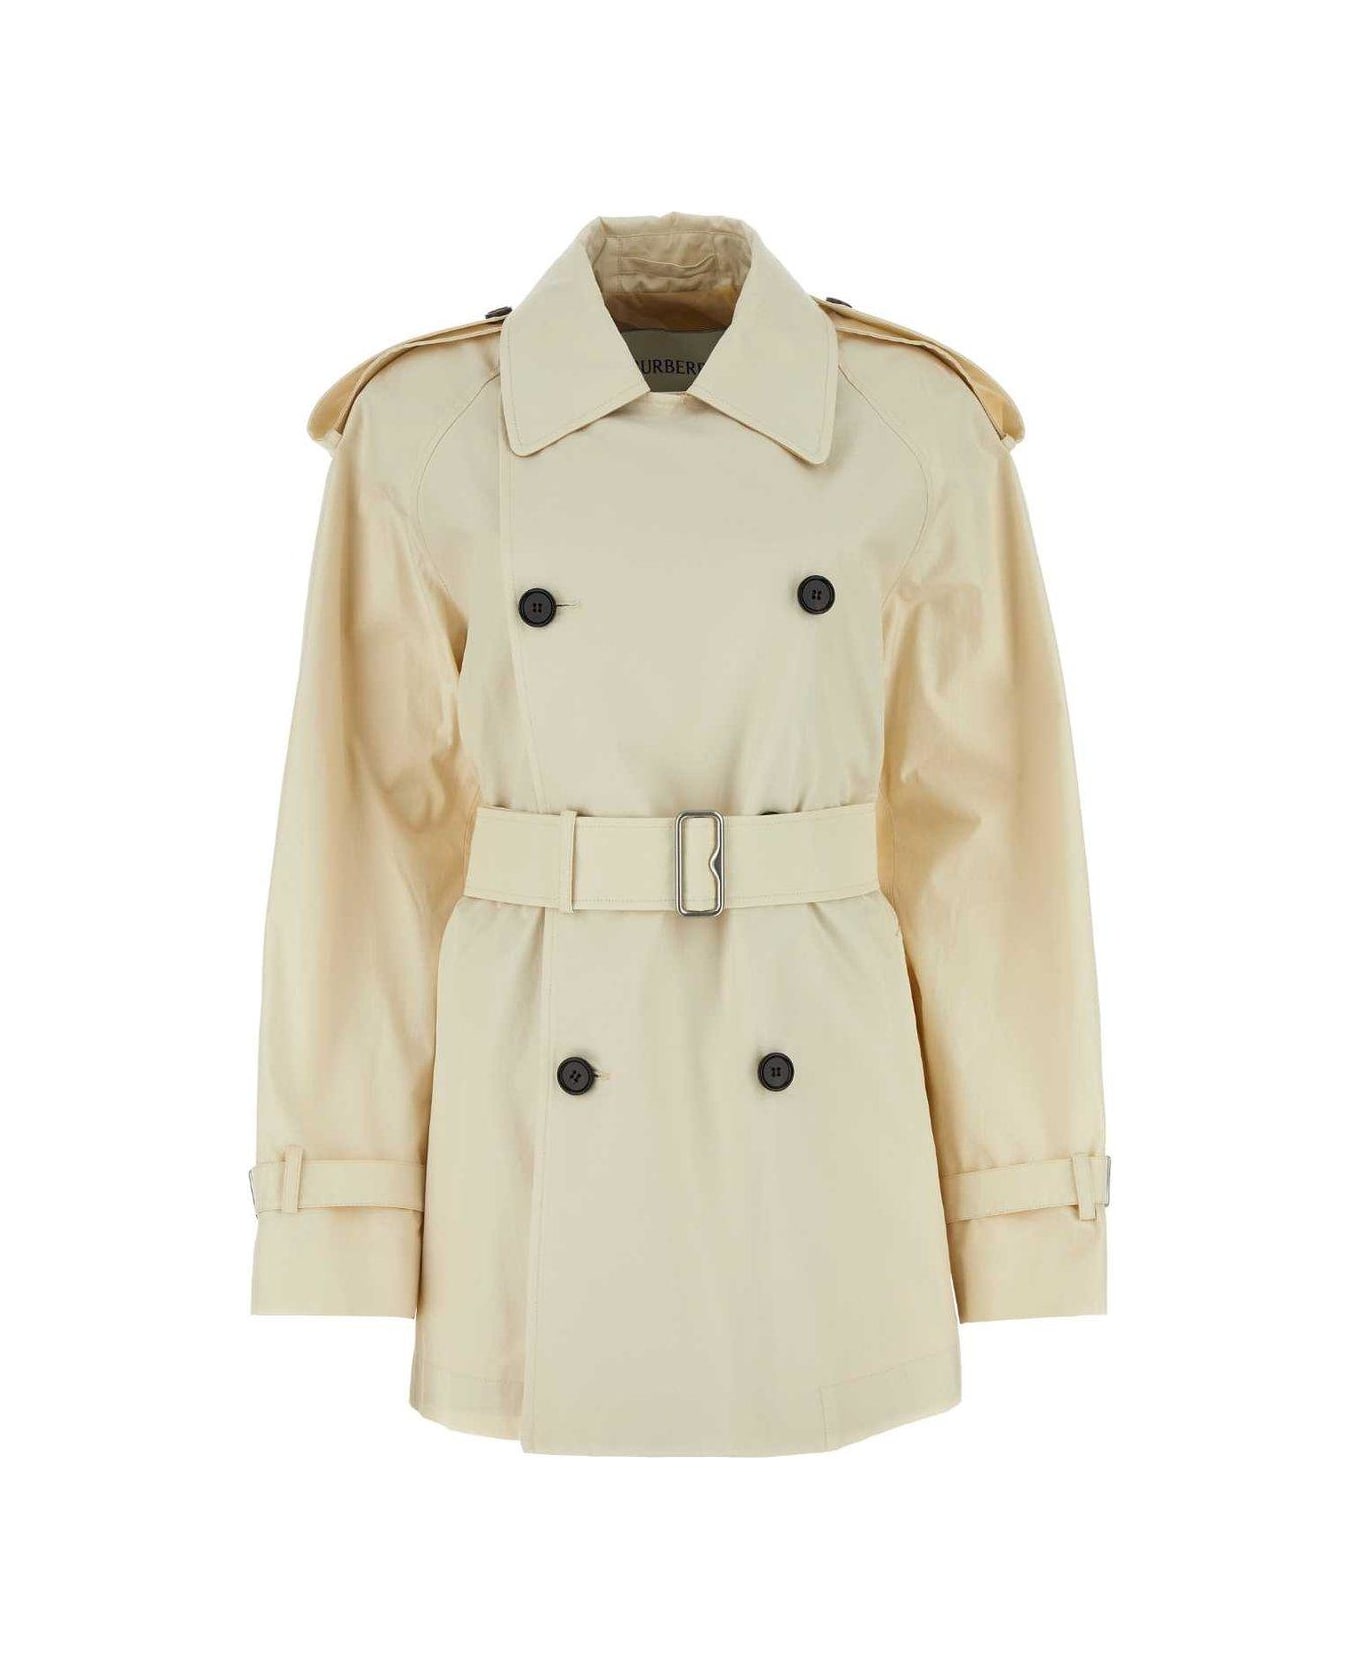 Burberry Double Breasted Belted Trench Coat - CALICO